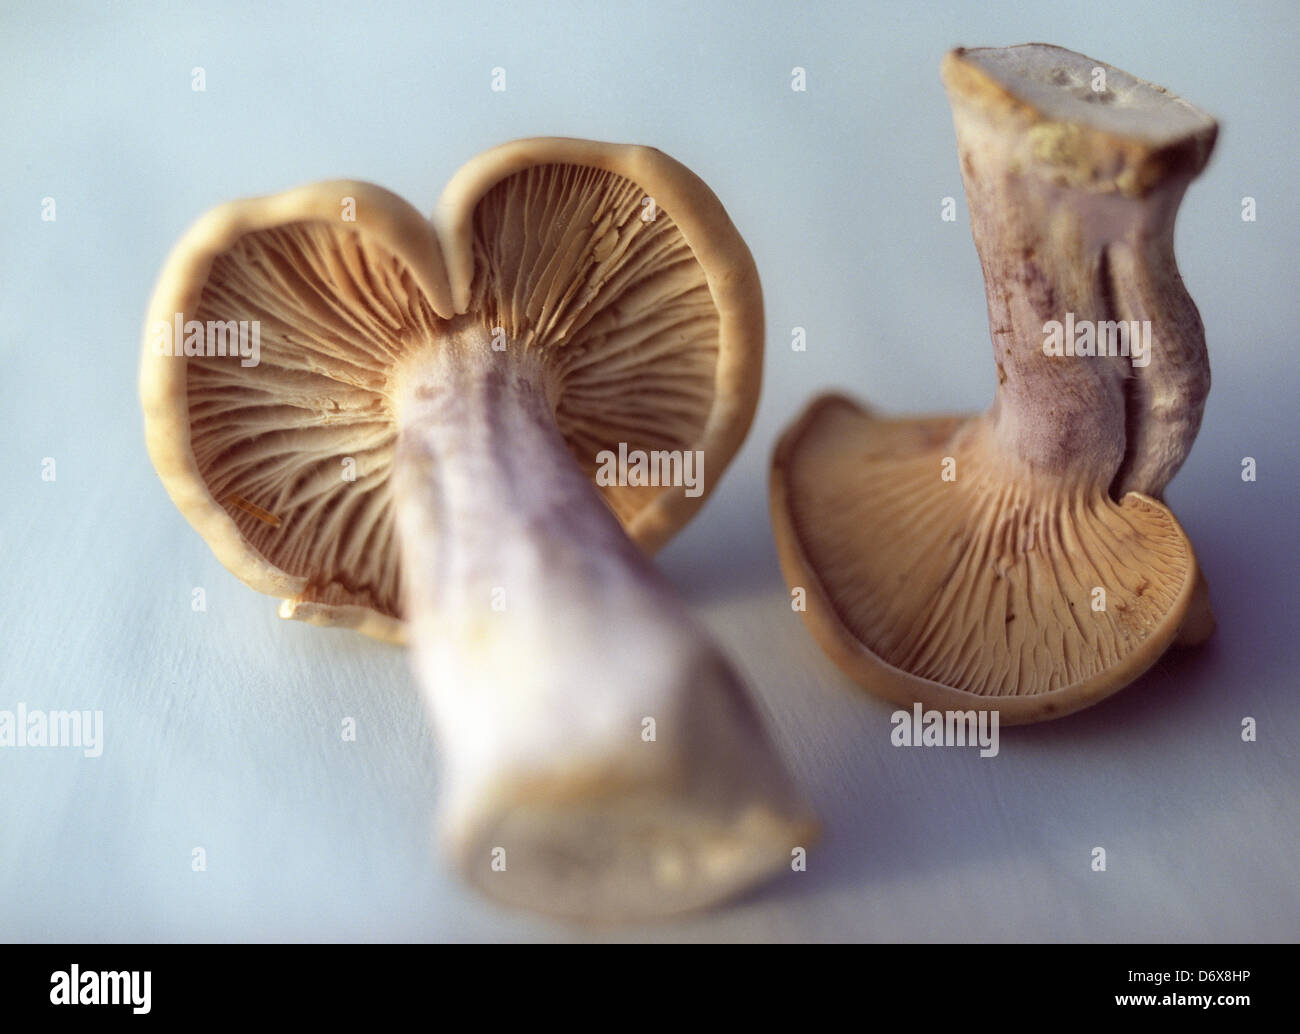 Whole Bluefoot mushrooms loose on a pale blue table top Stock Photo